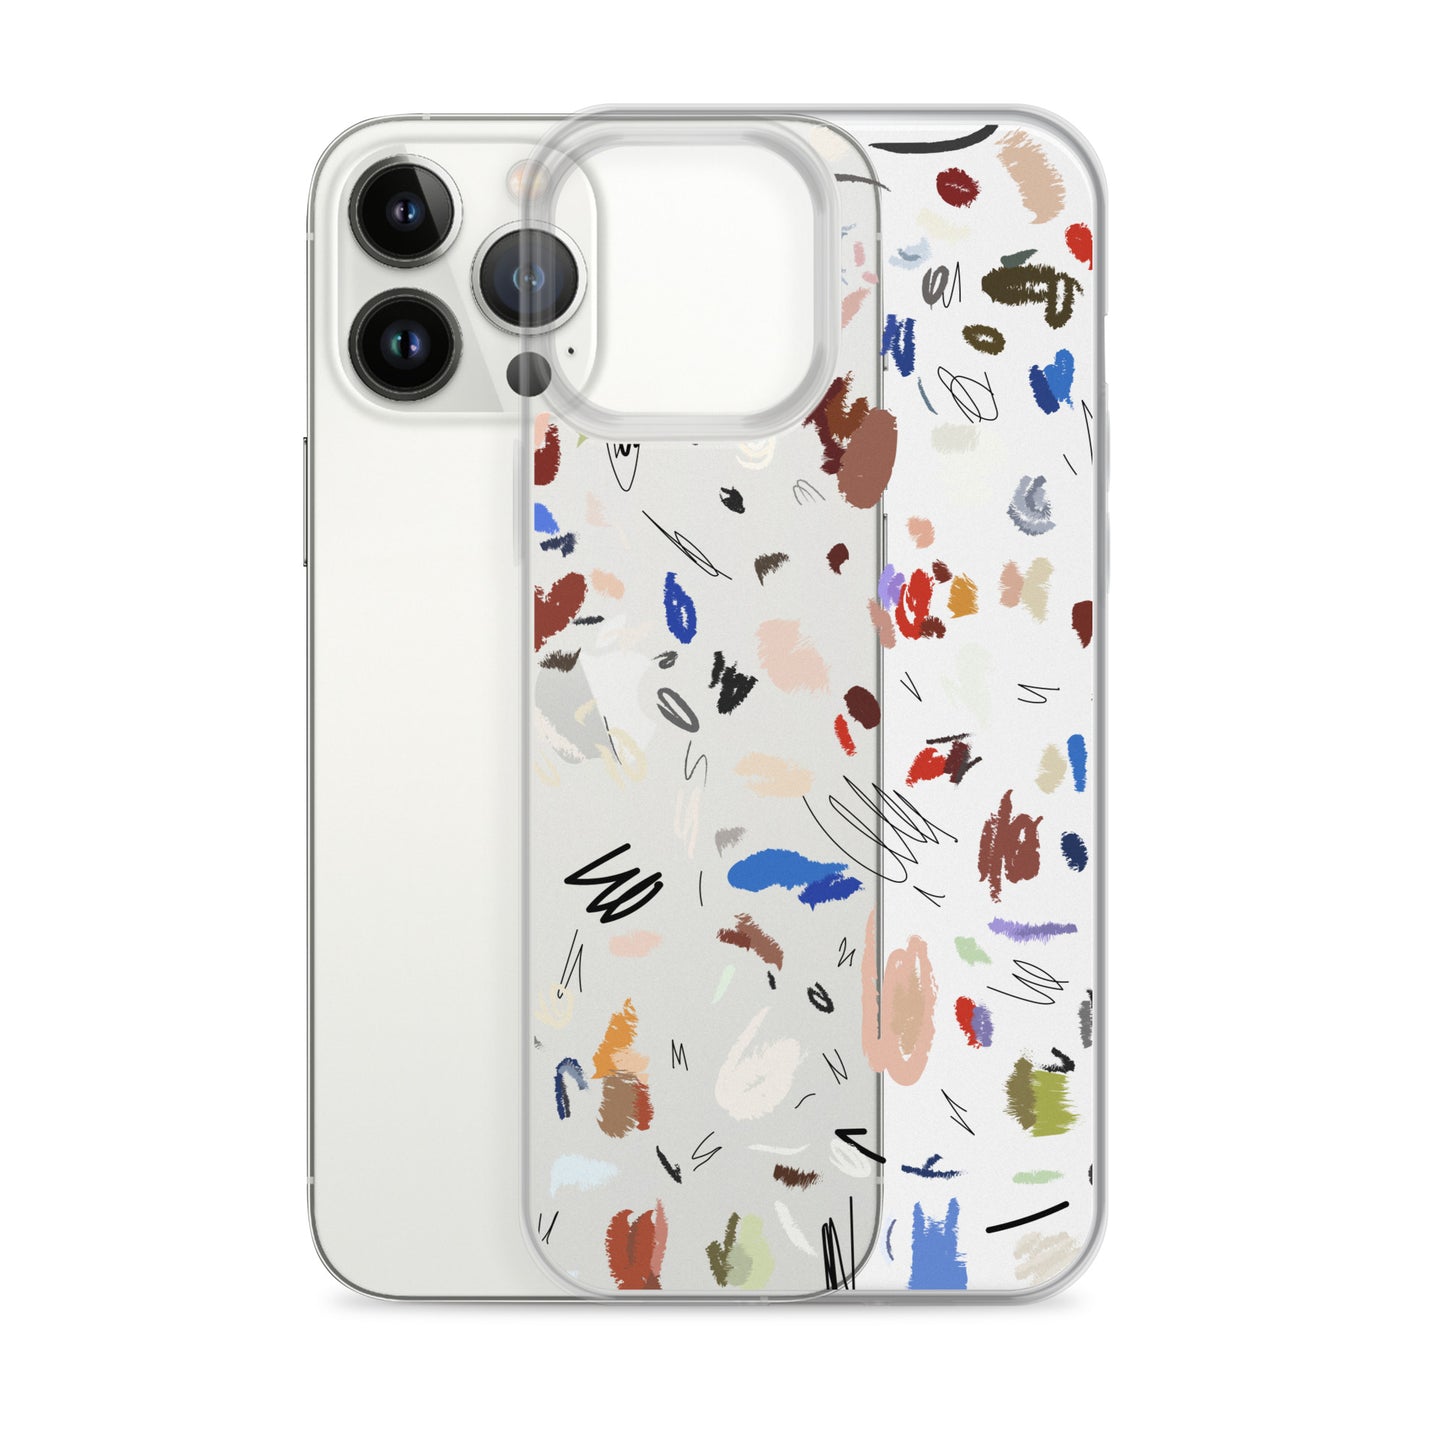 Abstract Modern Artistic iPhone Case